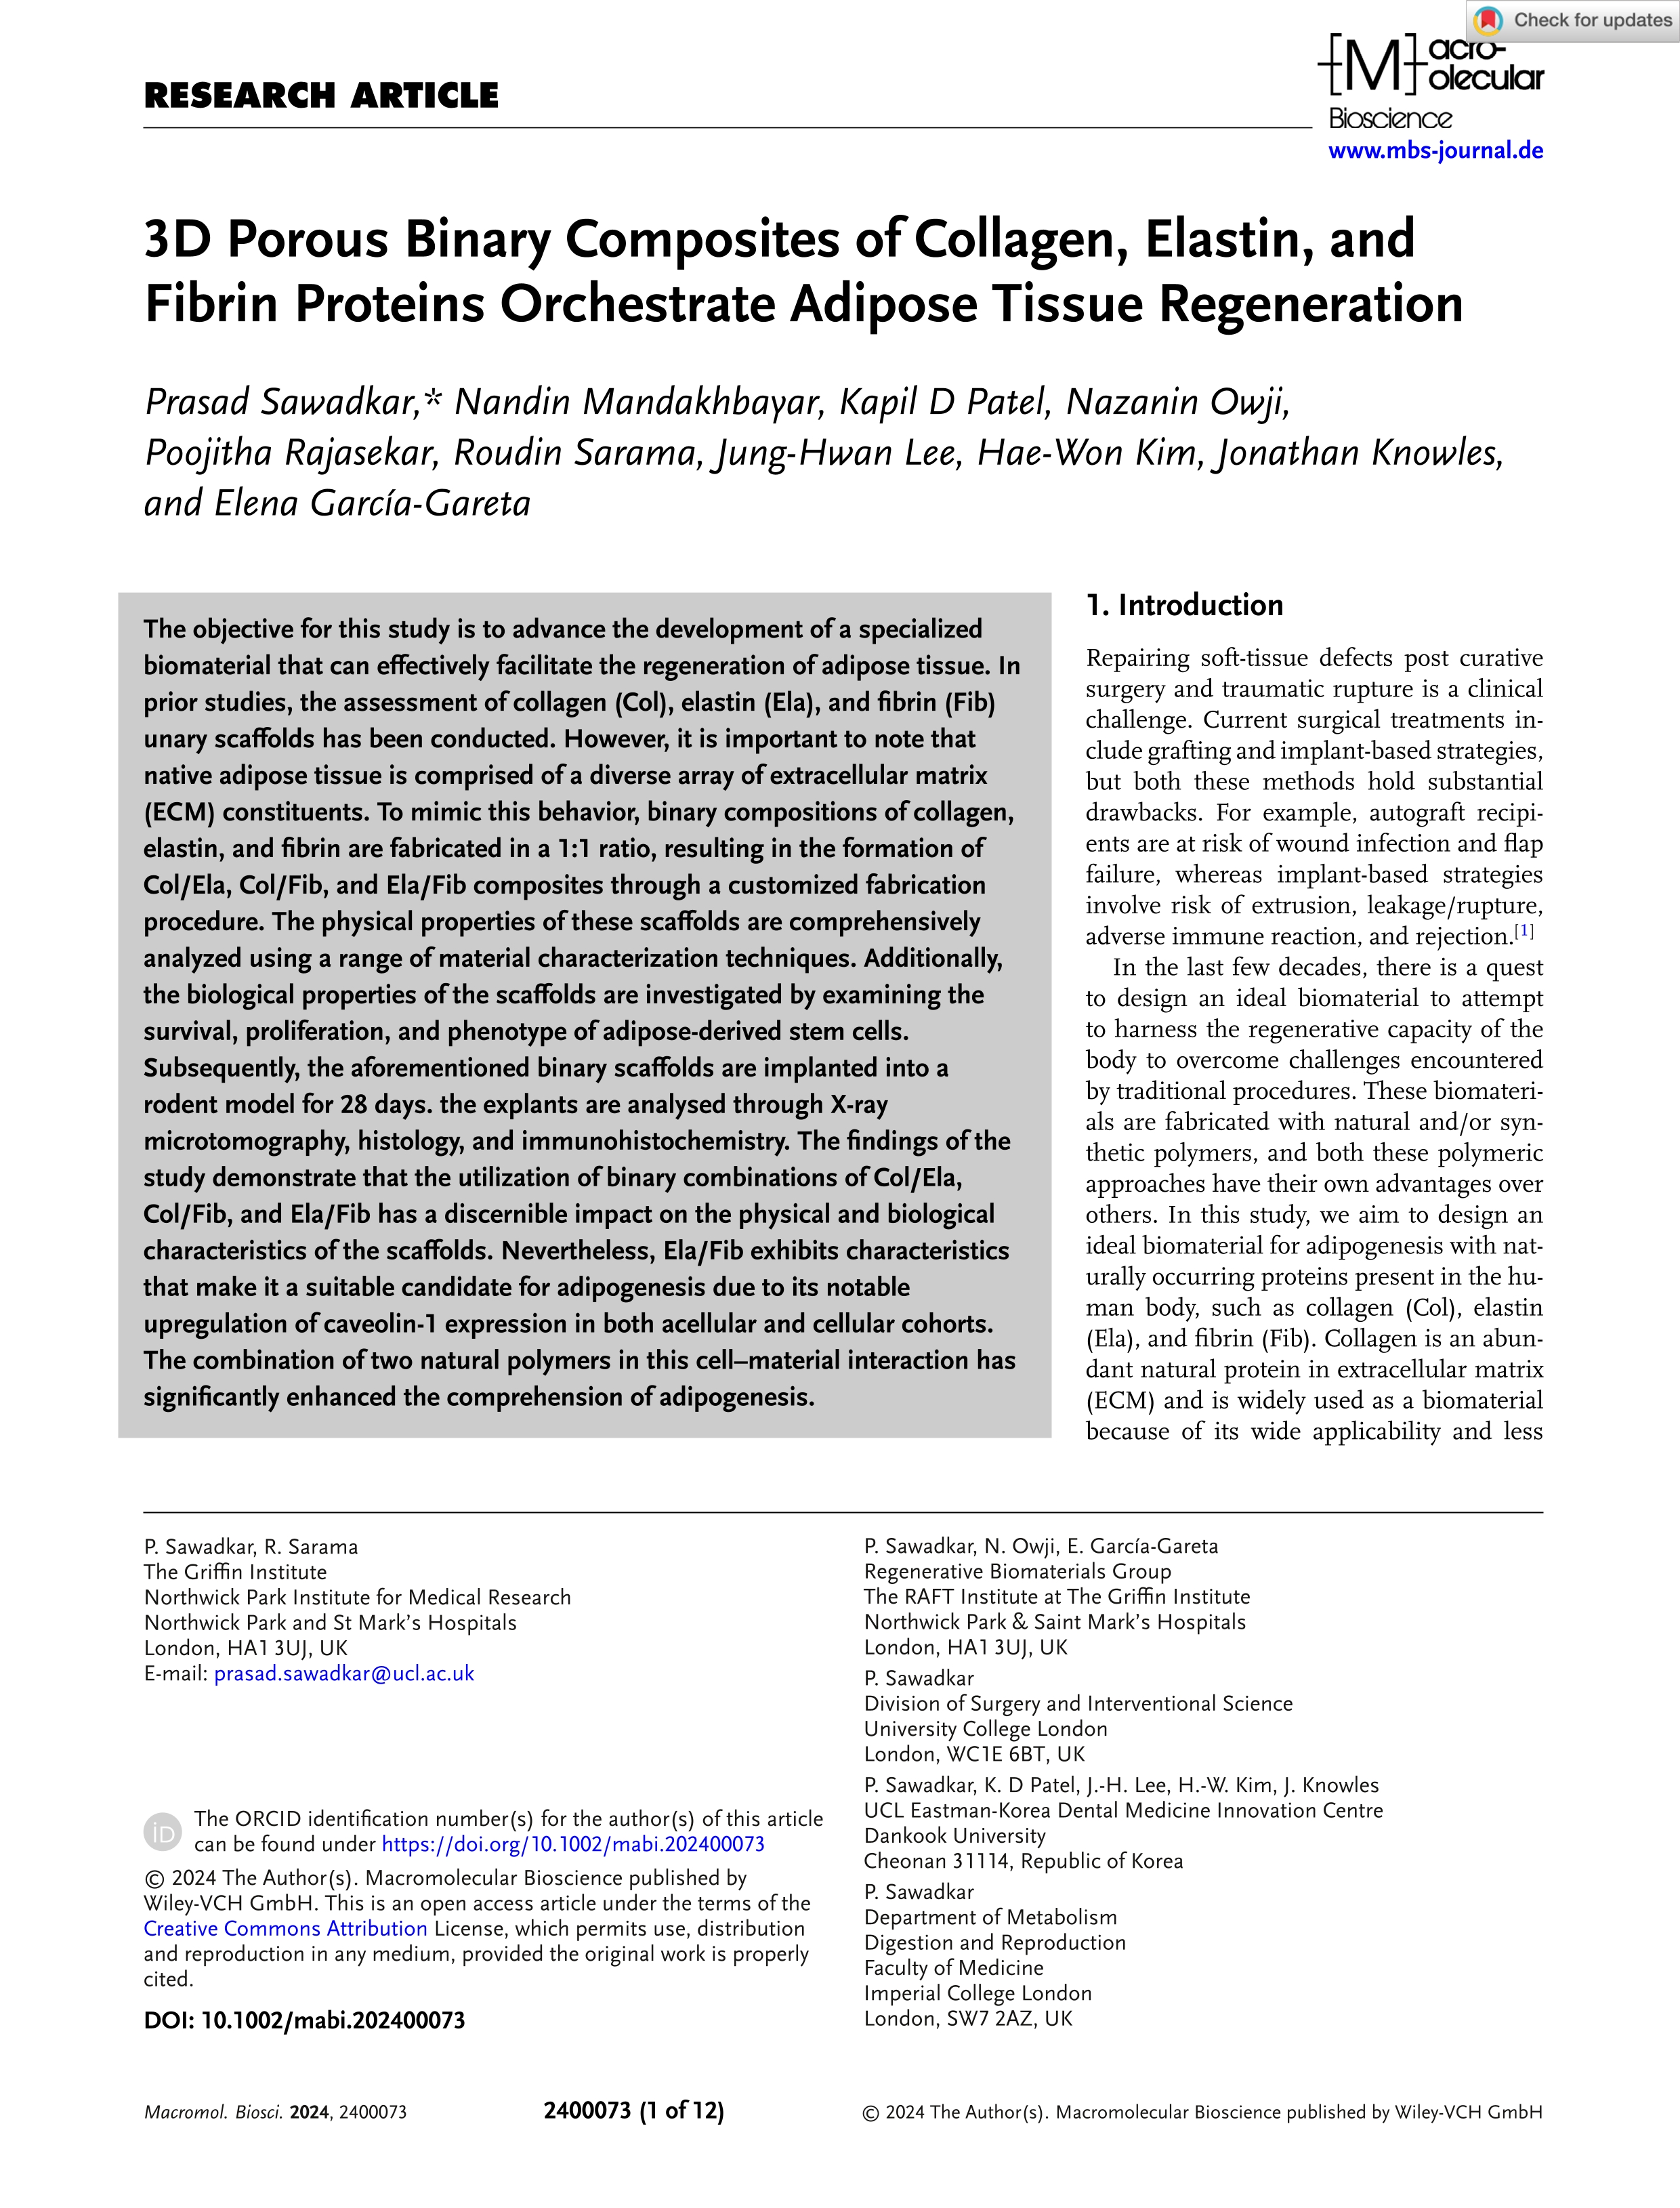 3D porous binary composites of collagen, elastin, and fibrin proteins orchestrate adipose tissue regeneration